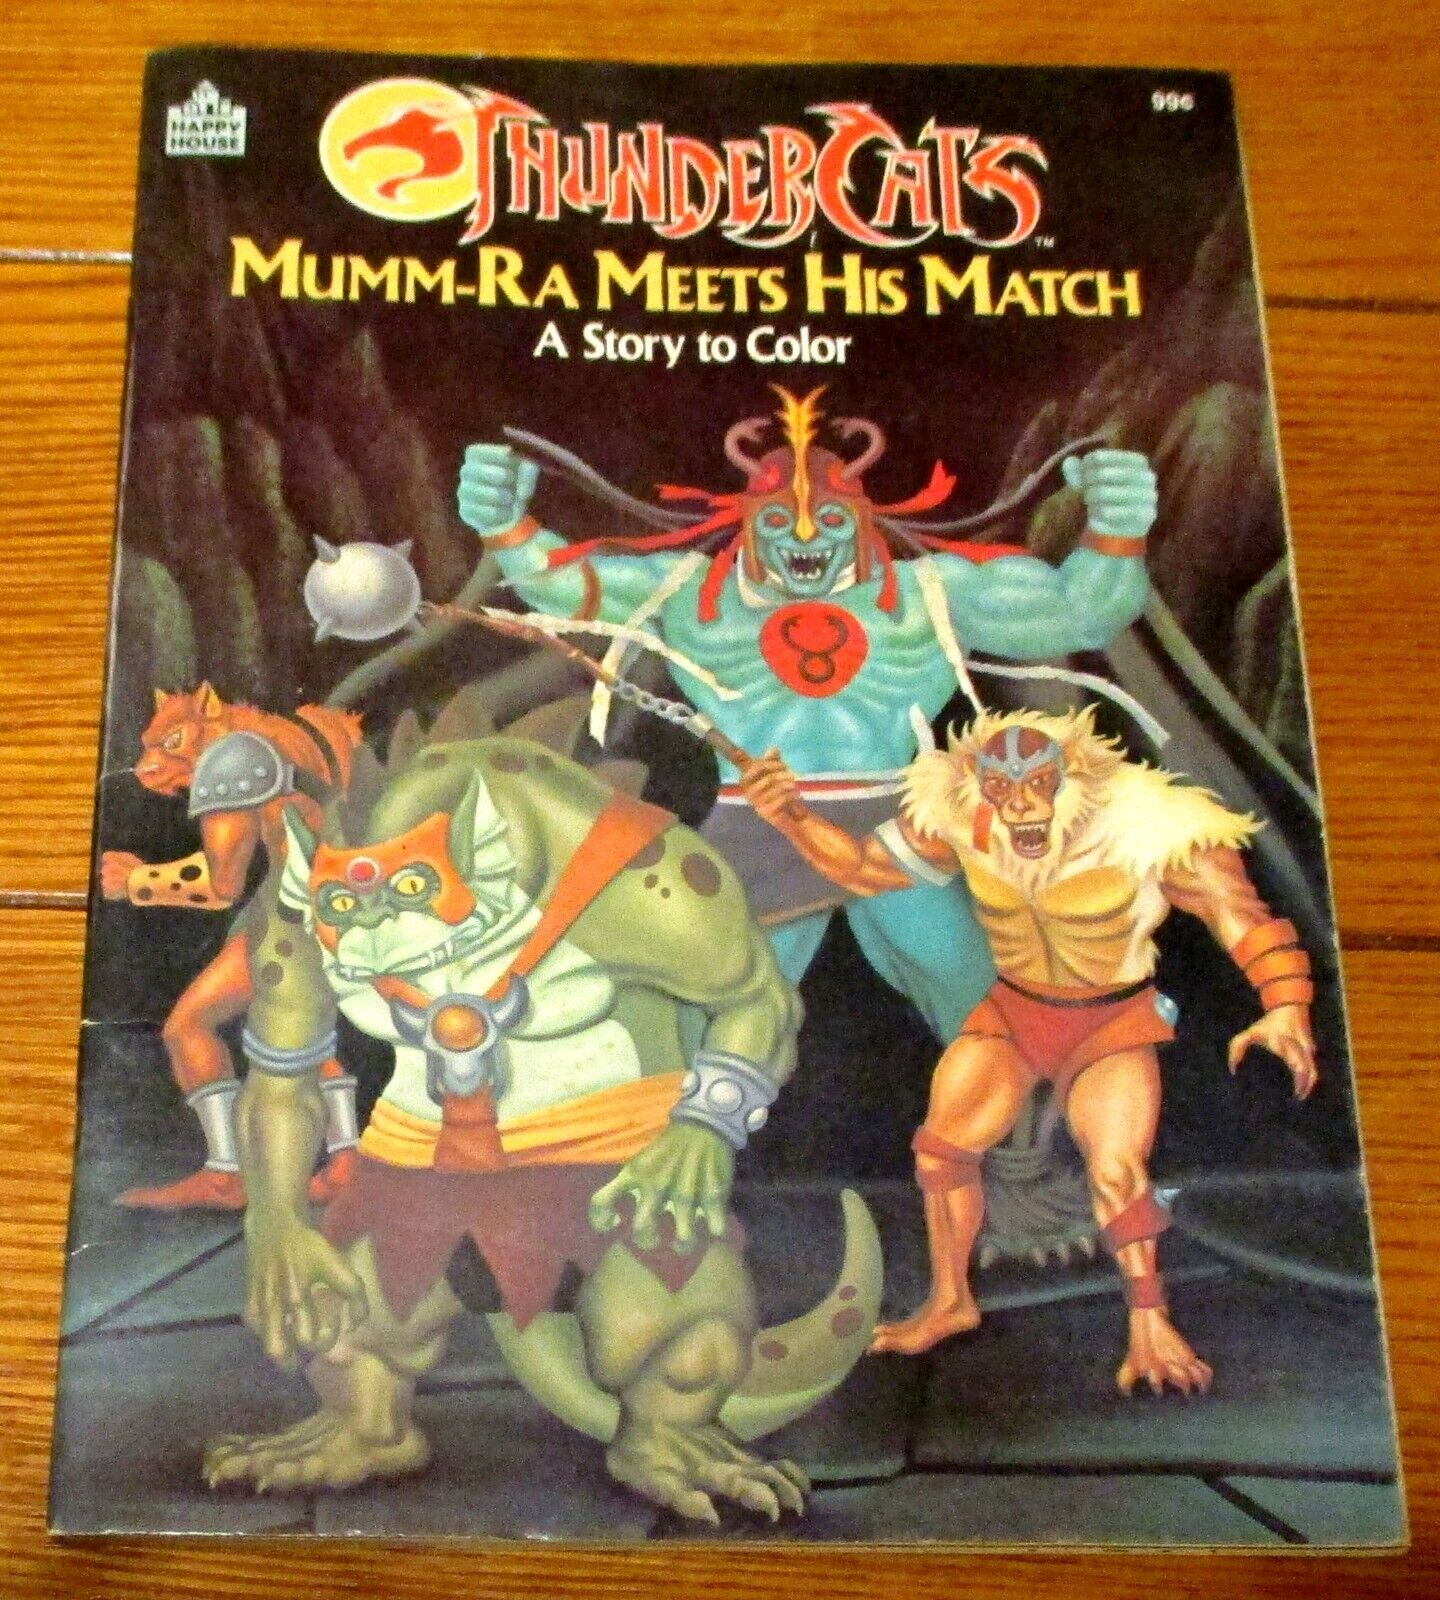 1986 Thunder Cats  Mumm-Ra Meets His Match  Coloring Book  48 Pages  NICE